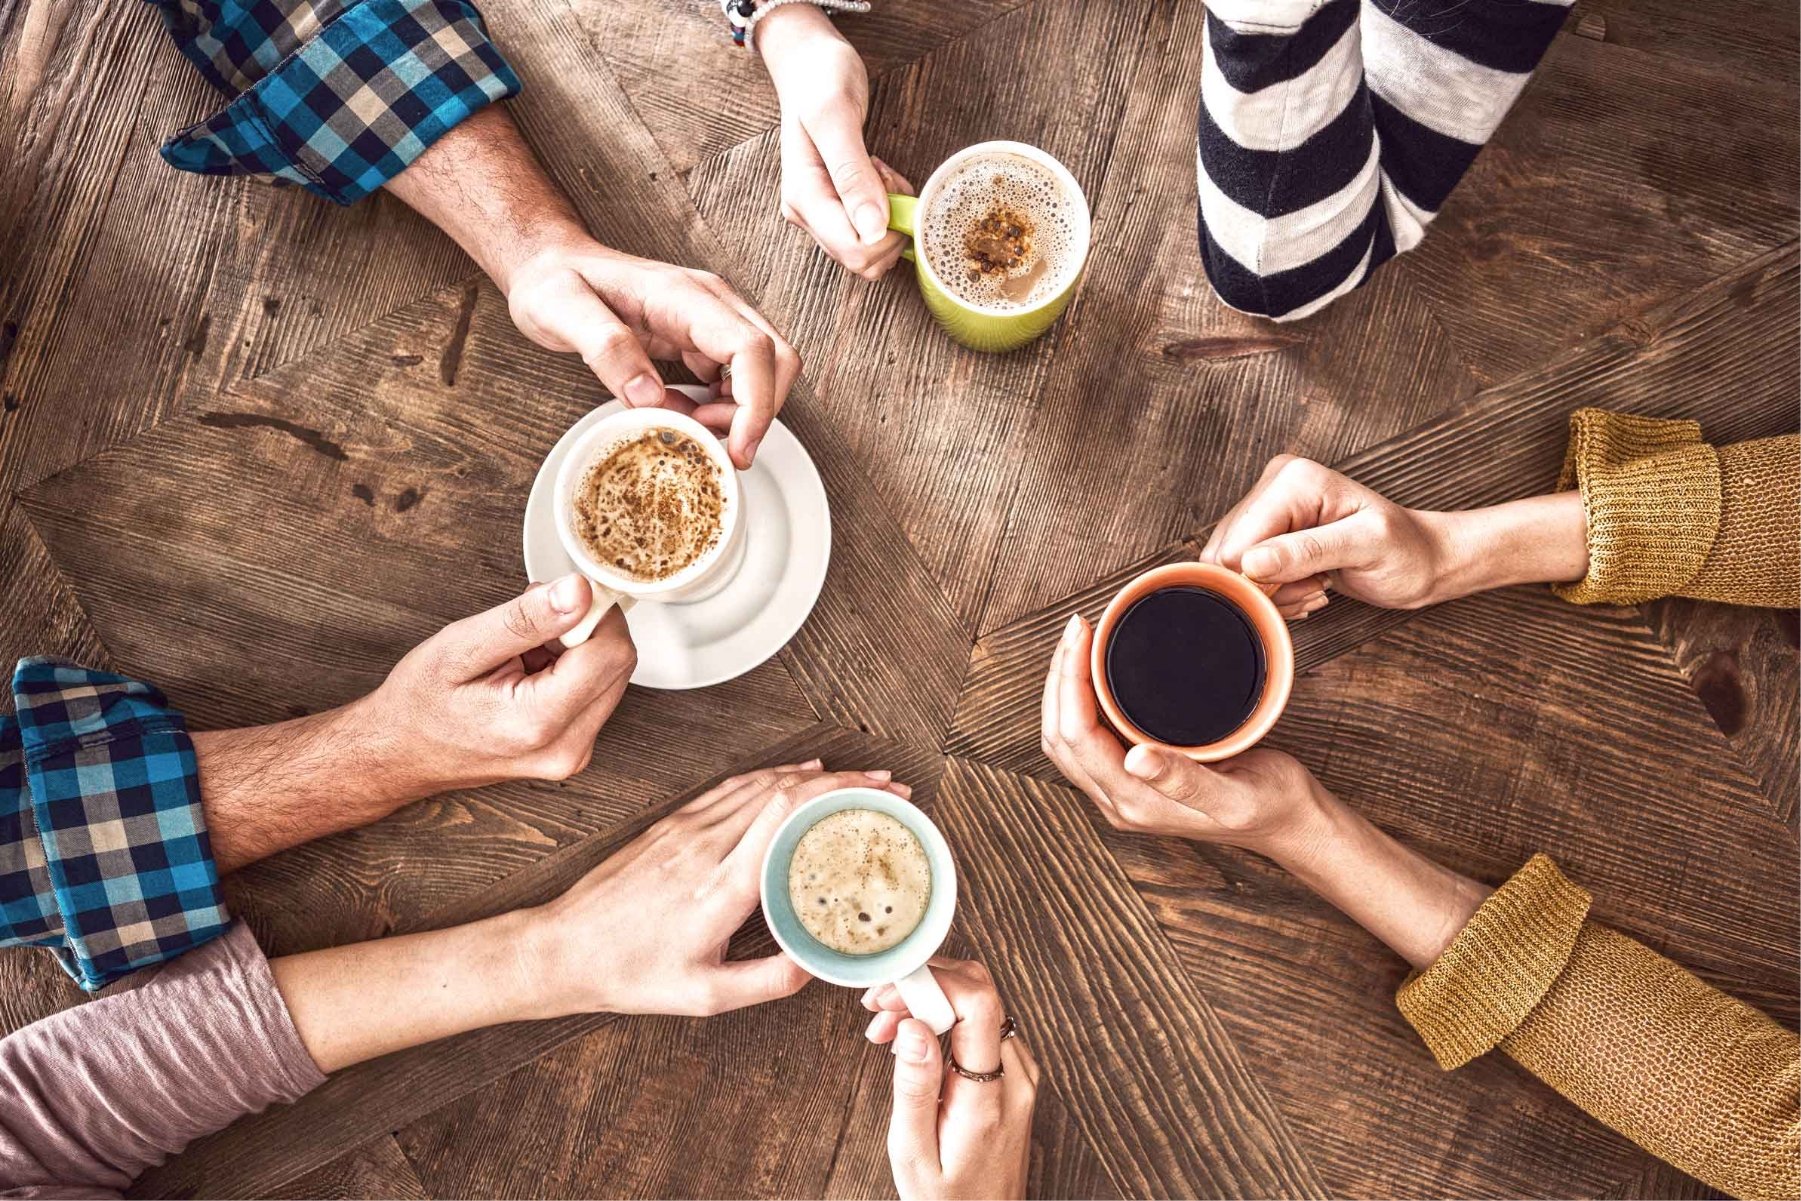 An image of a group of people drinking coffee only showing their elbows down and the coffee cups on the table from above.